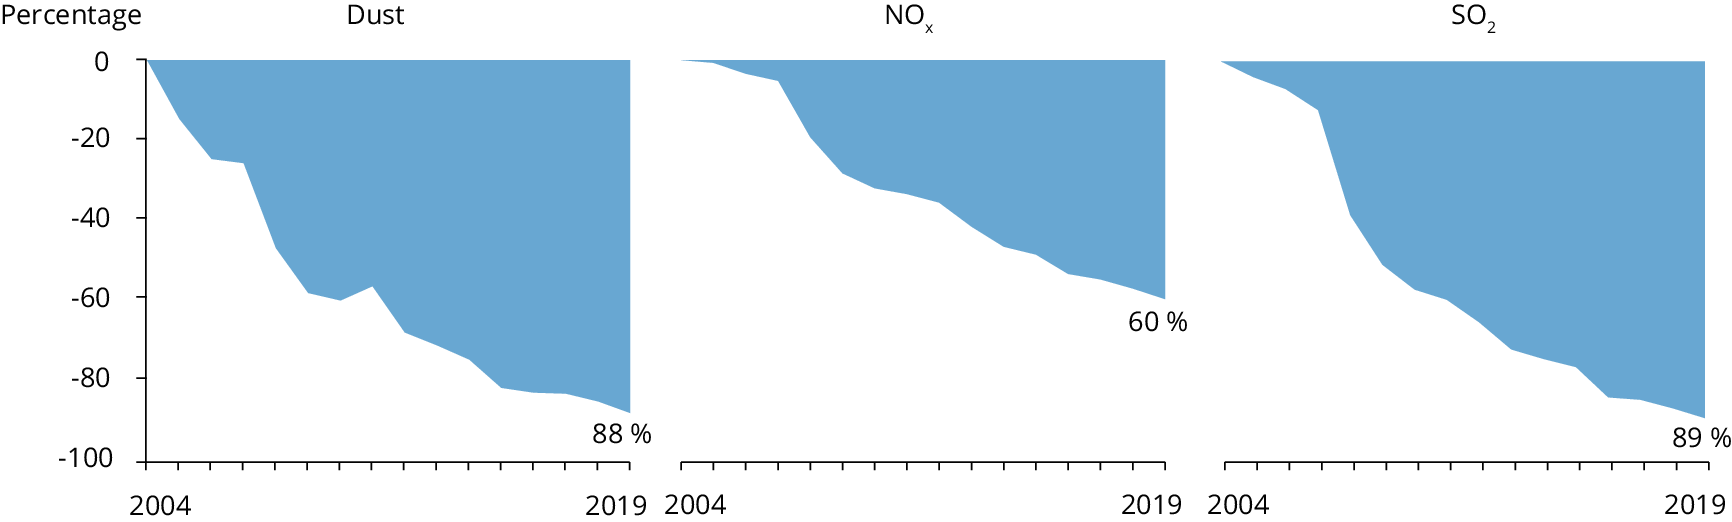 Emission reductions for dust, nitrogen oxides and sulphur dioxide from large combustion plants in the EU-27